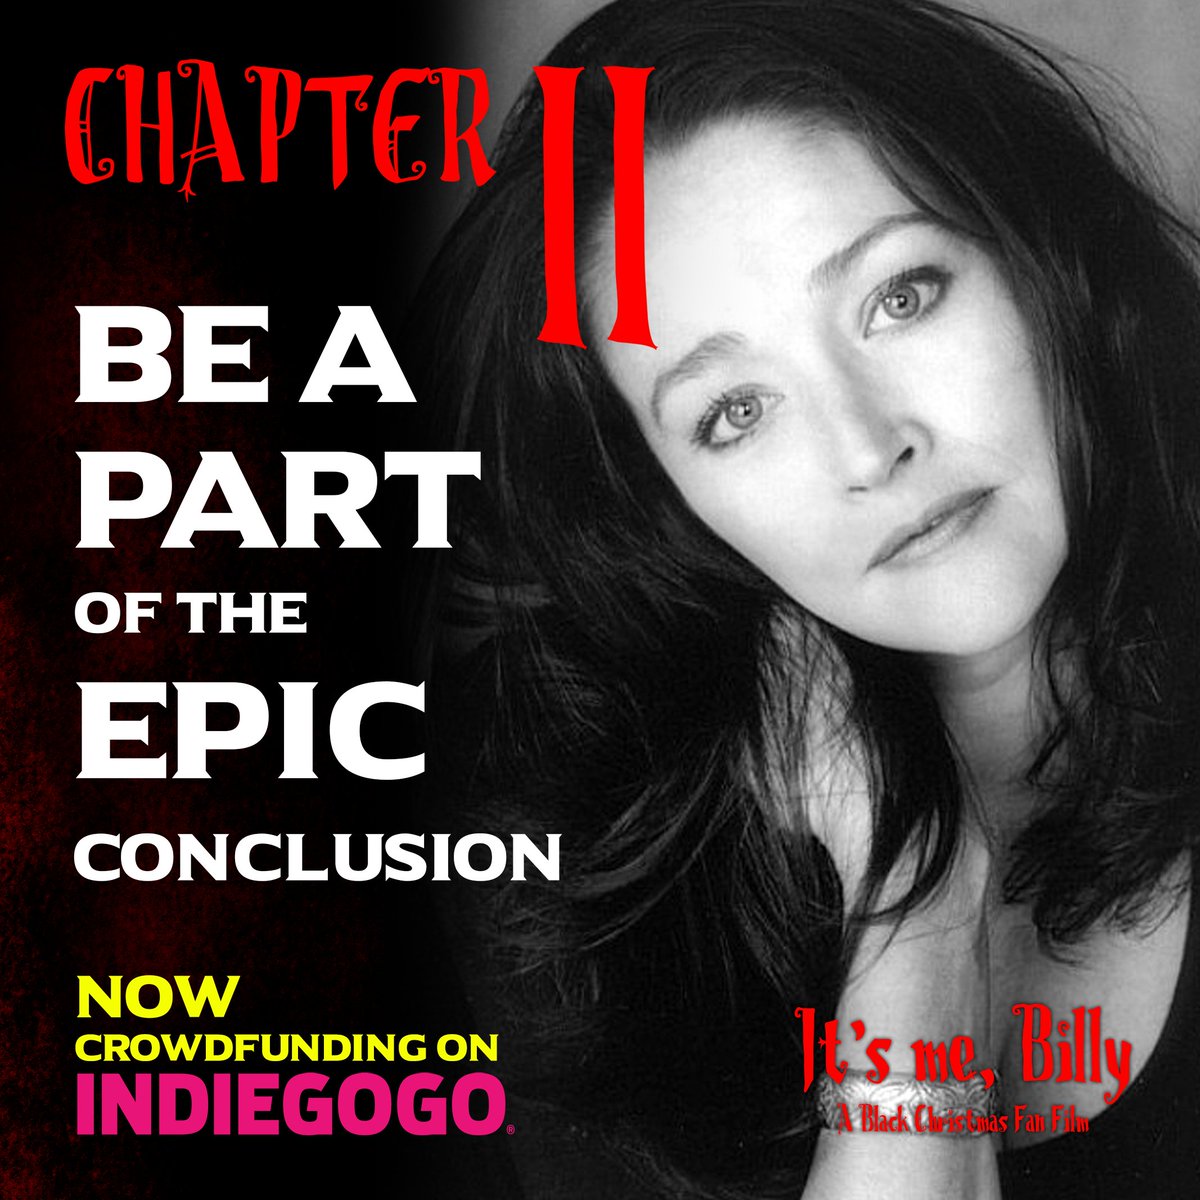 'Phyl! Barb! Please answer me!!'
Olivia Hussey returns to her final girl roots as Jess Bradford in It's Me, Billy Chapter 2. NOW Crowdfunding on Indiegogo.  
Crowdfunding here 👇👇
igg.me/p/2813715/twtr…
#itsmebilly #itsmebilly2 #blackchristmas #horror #canadafilm
#fanfilm